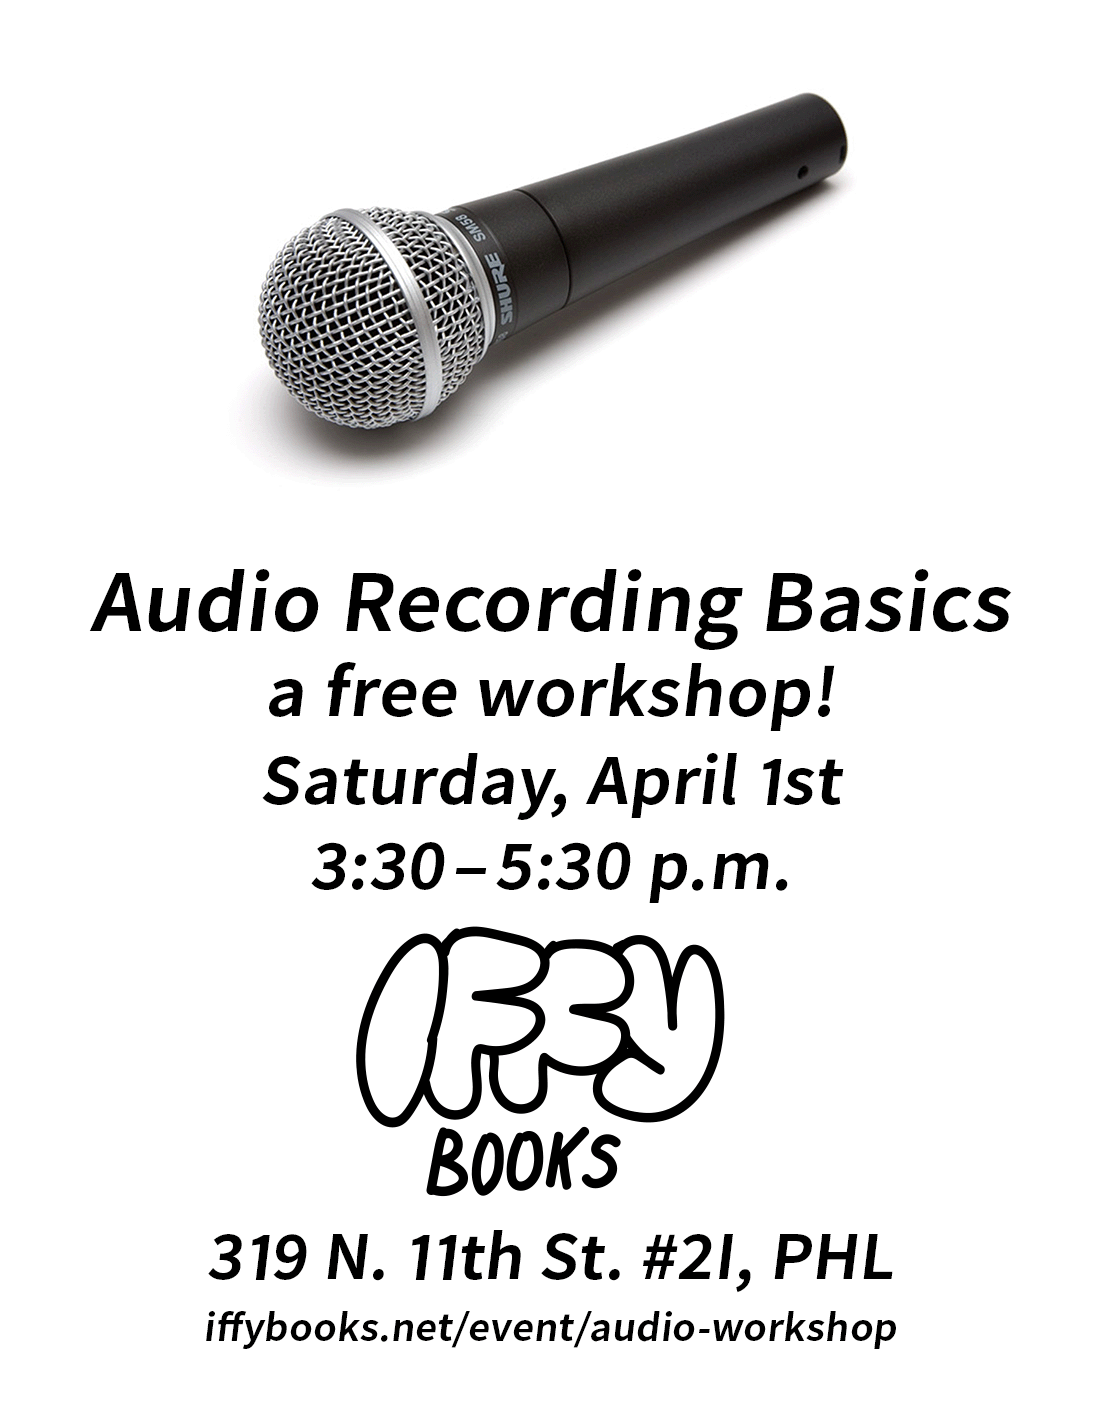 Flyer with a photo of a microphone and the following text: Audio Recording Basics / a free workshop! / Saturday, April 1st / 3:30–5:30 p.m. / 319 N. 11th St. #2I, PHL / iffybooks.net/event/audio-workshop